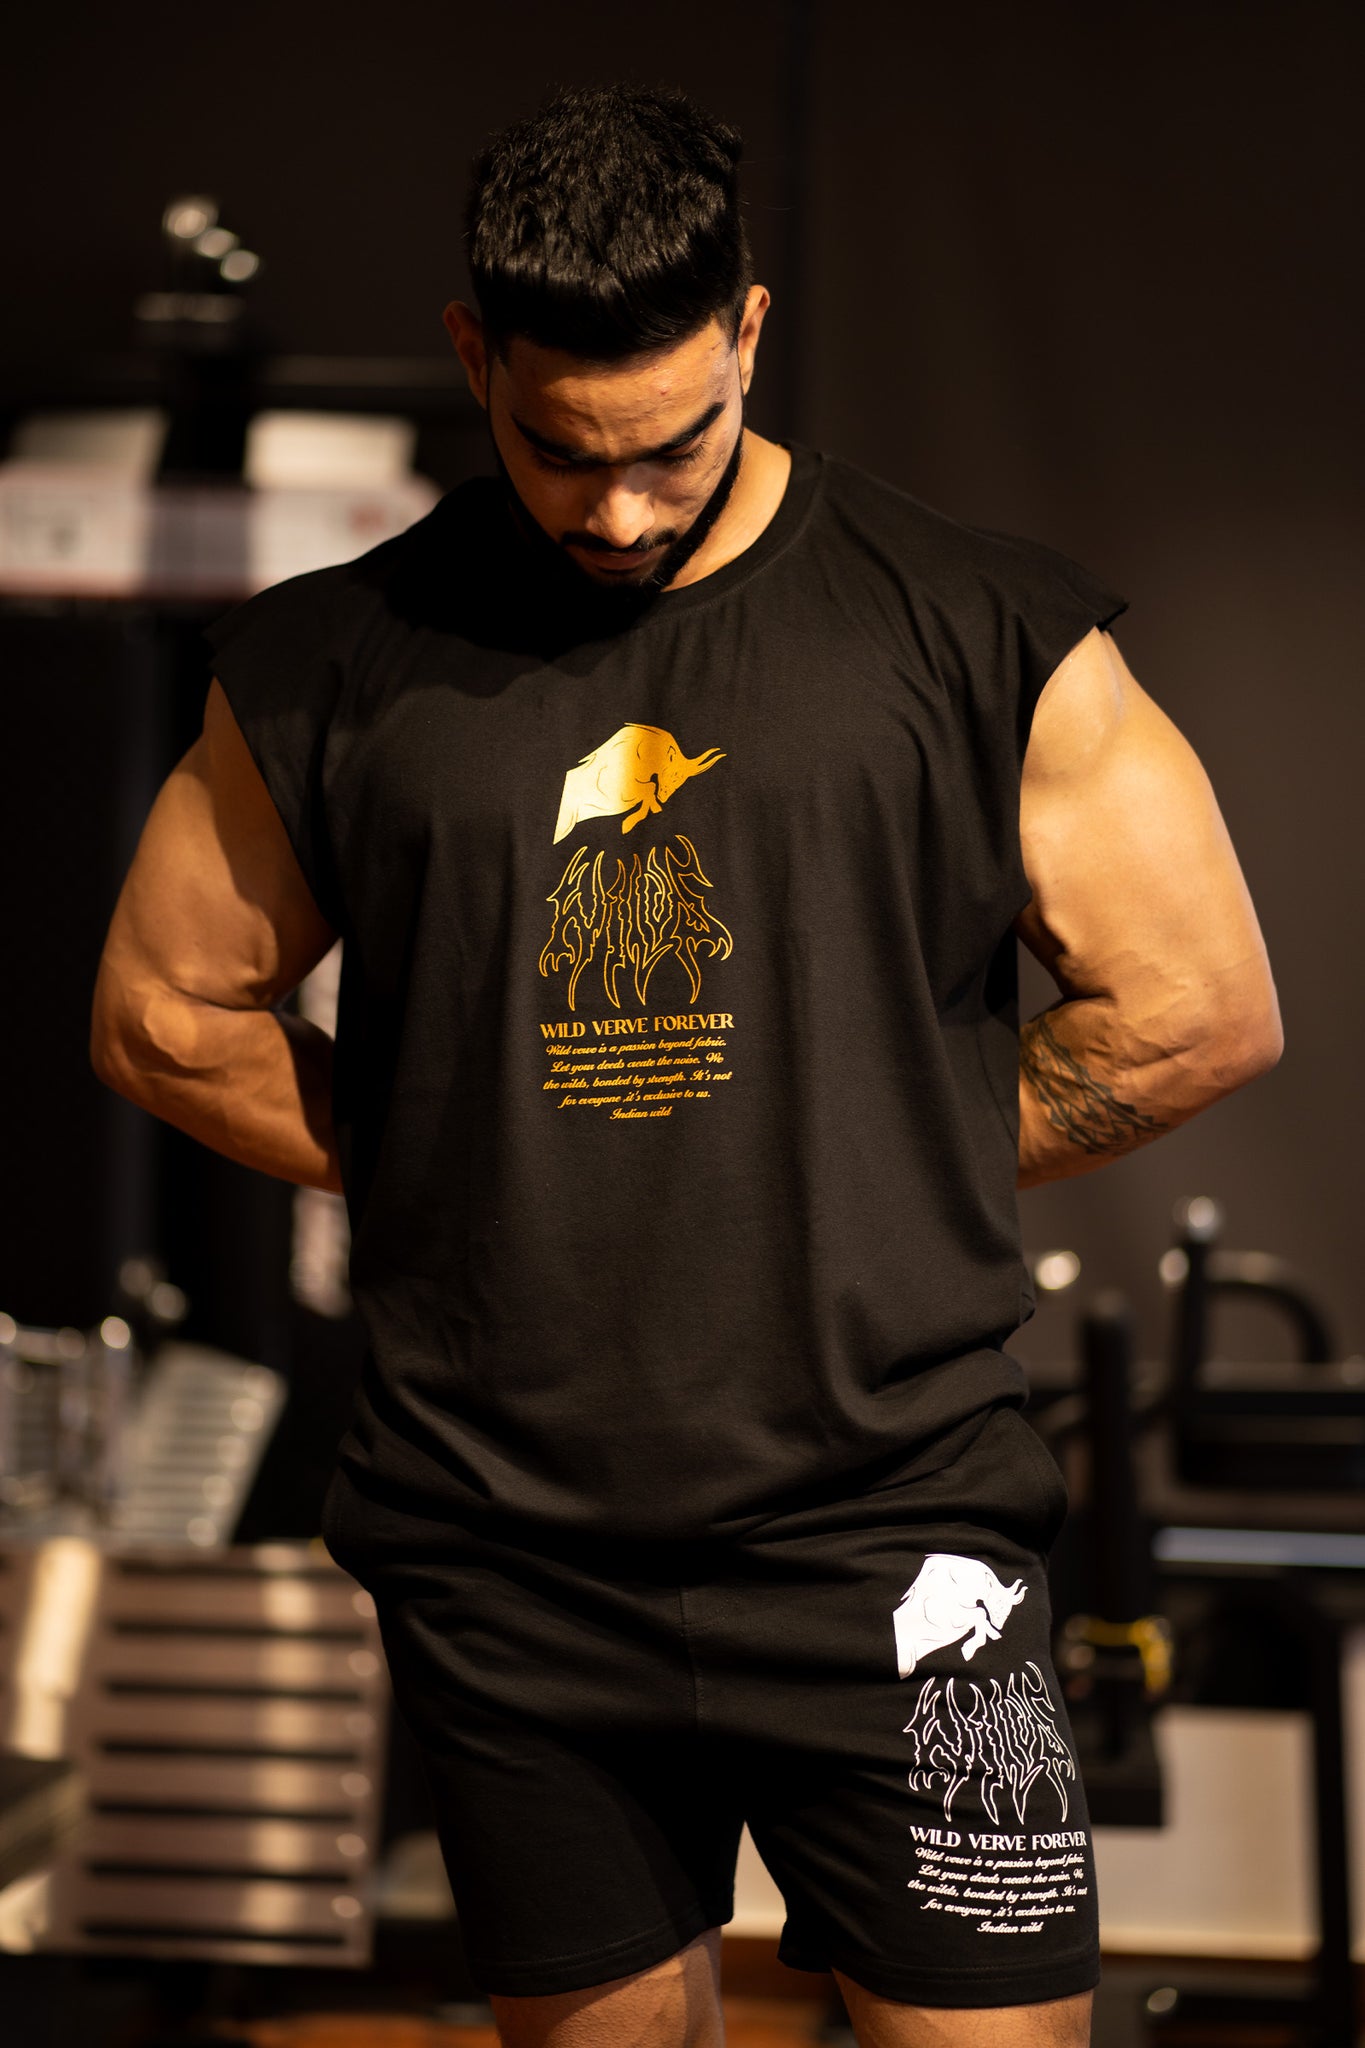 WILDS FLAME "PREMIUM" MUSCLE TEE IN BLACK (GOLD PRINT)